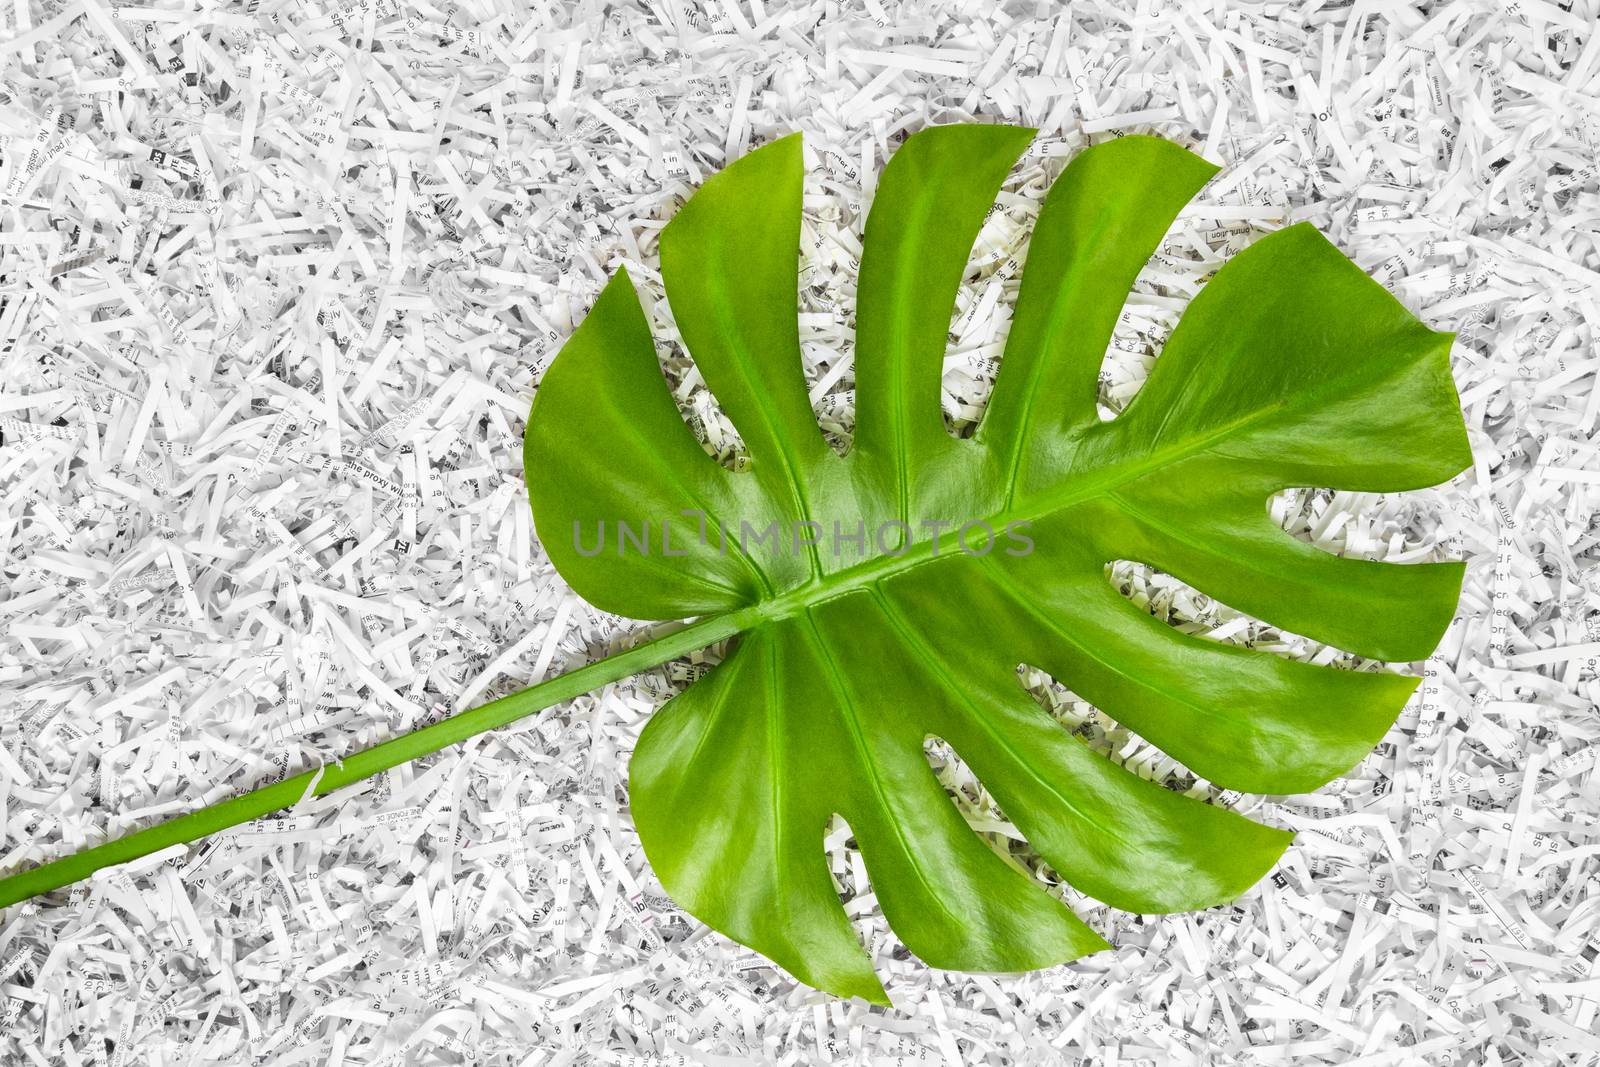 Tropical green Monstera leaf in a heap of shredded paper. Recycling concept.